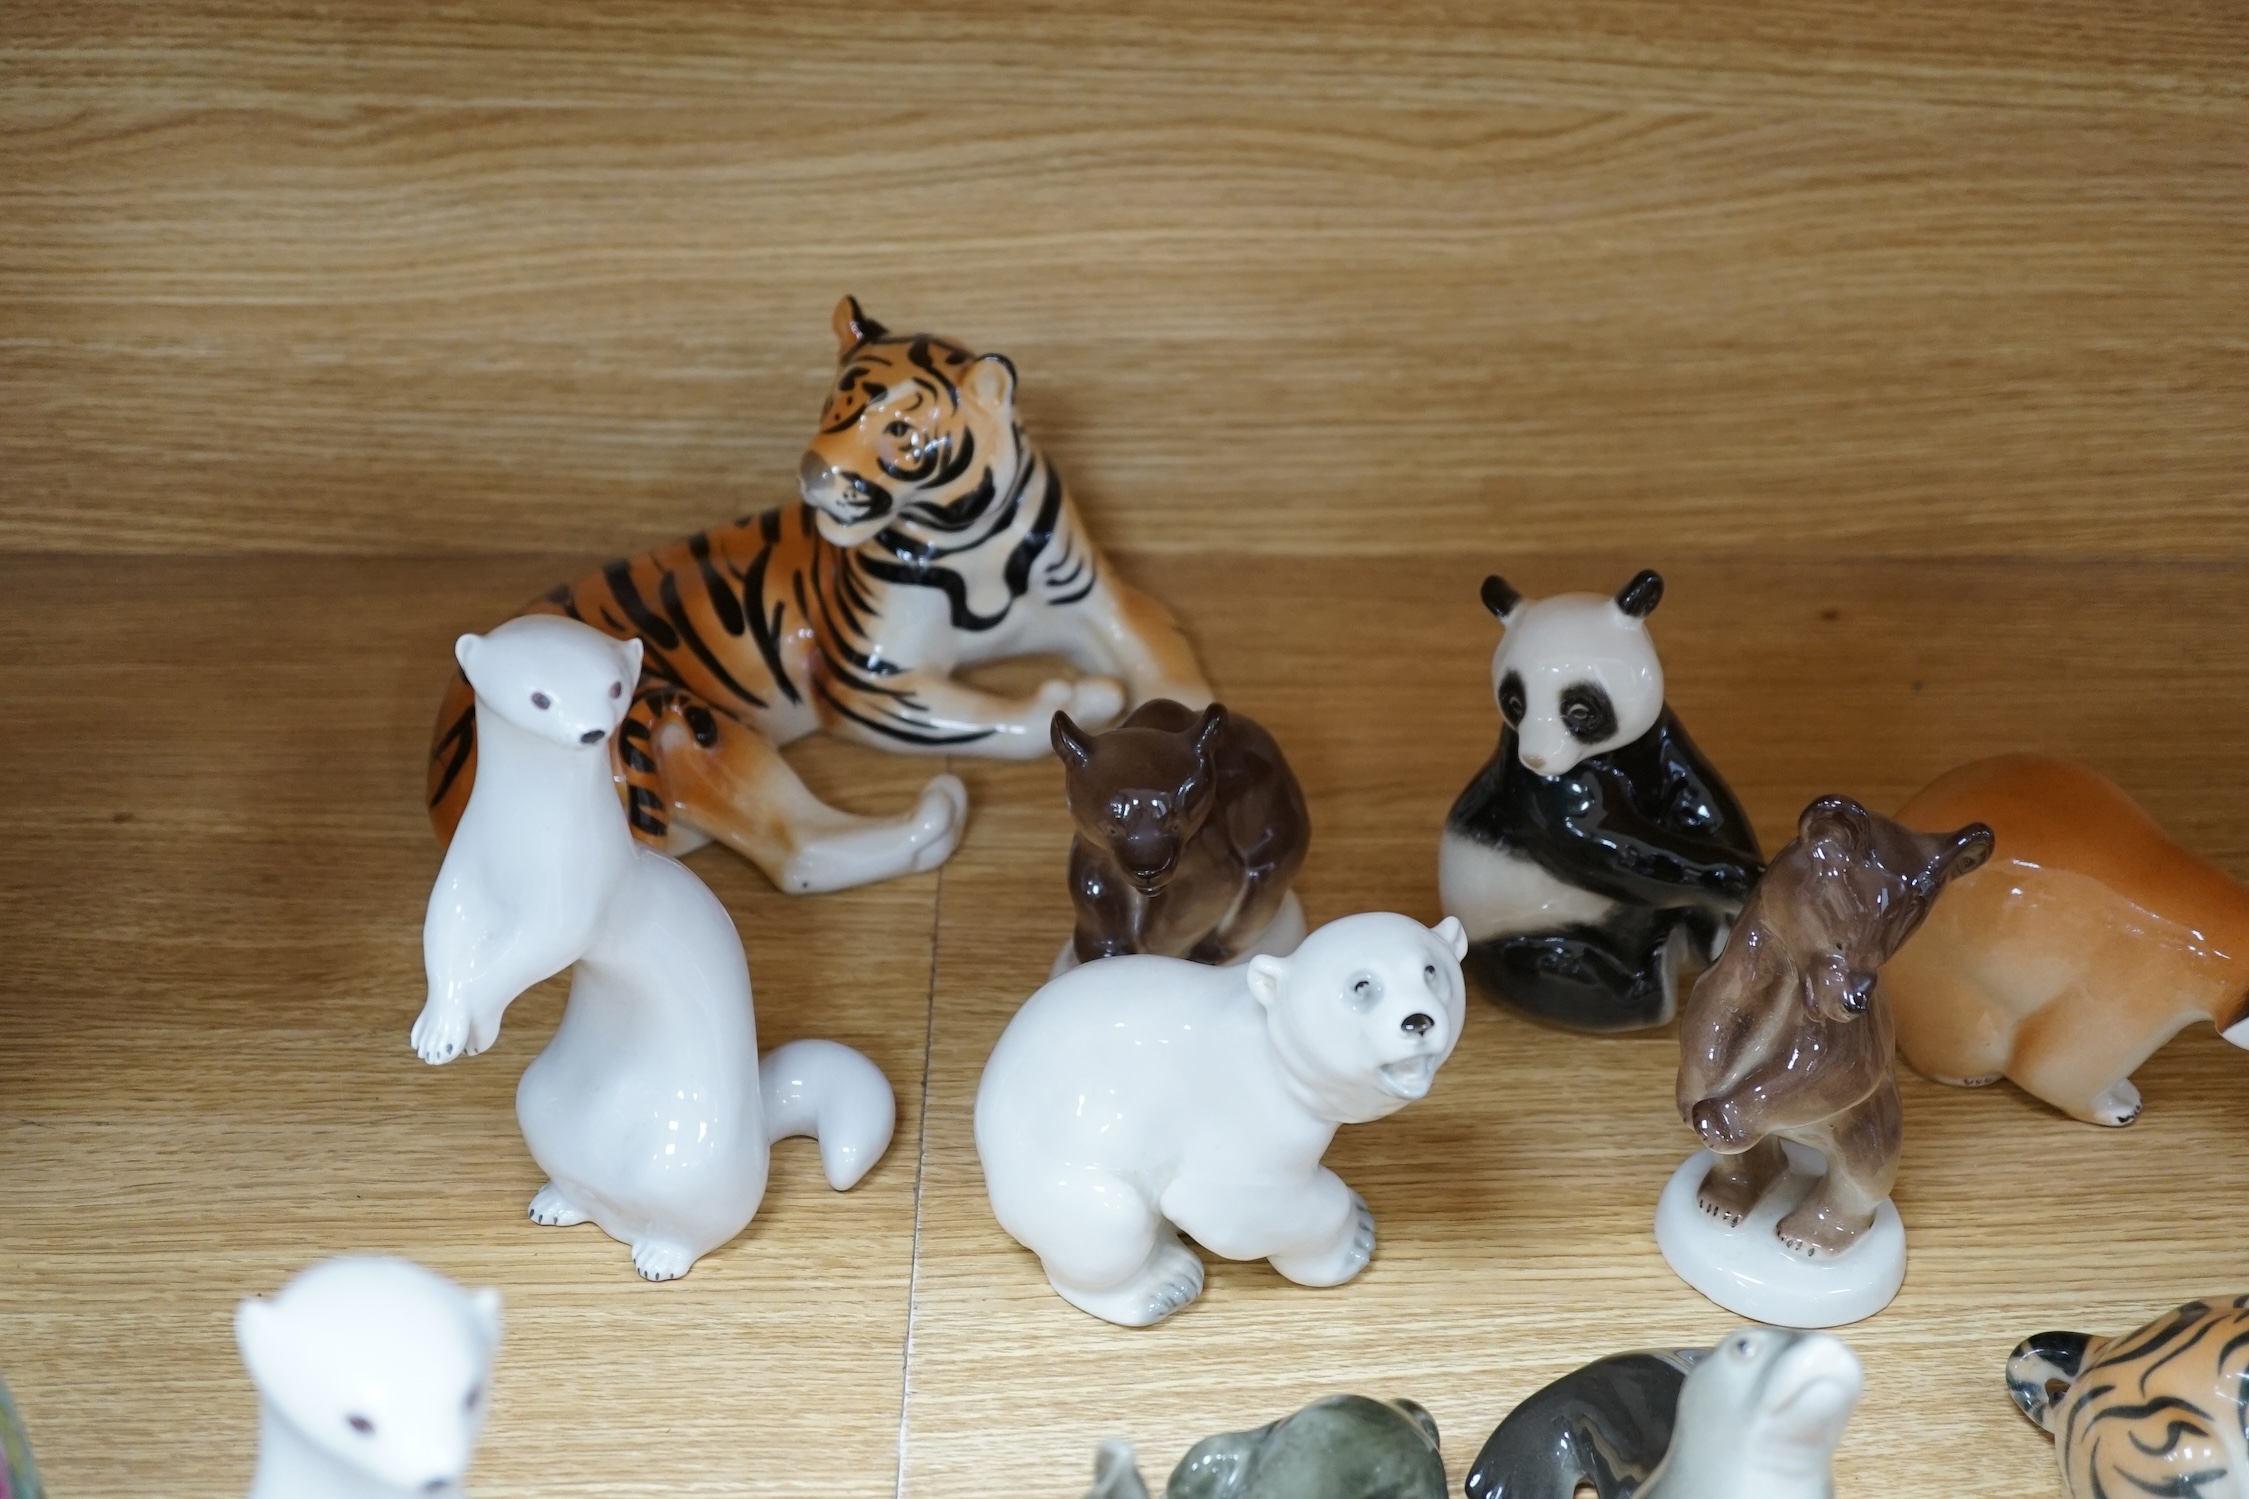 A quantity of Russian ceramic animal ornaments, tallest 19cm. Condition - good